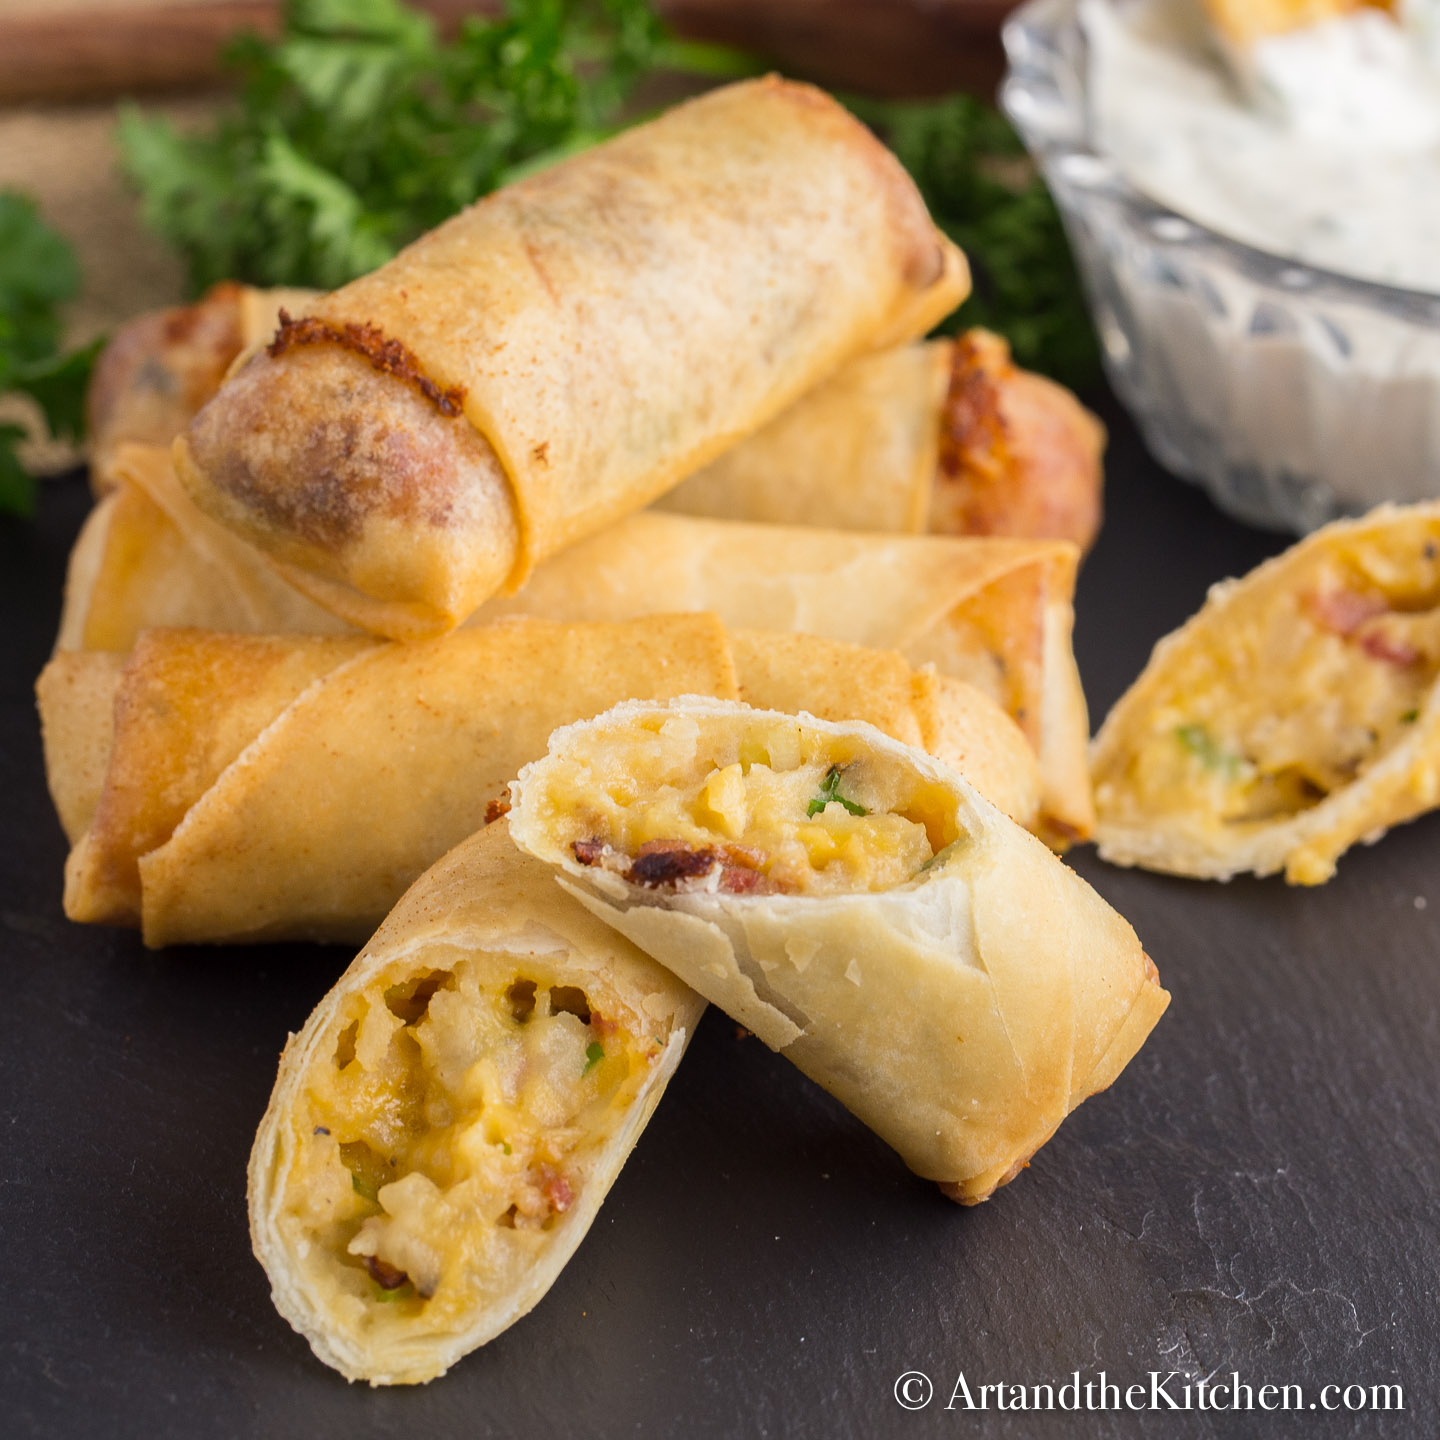 Stack of spring rolls filled with a baked potato mixture.